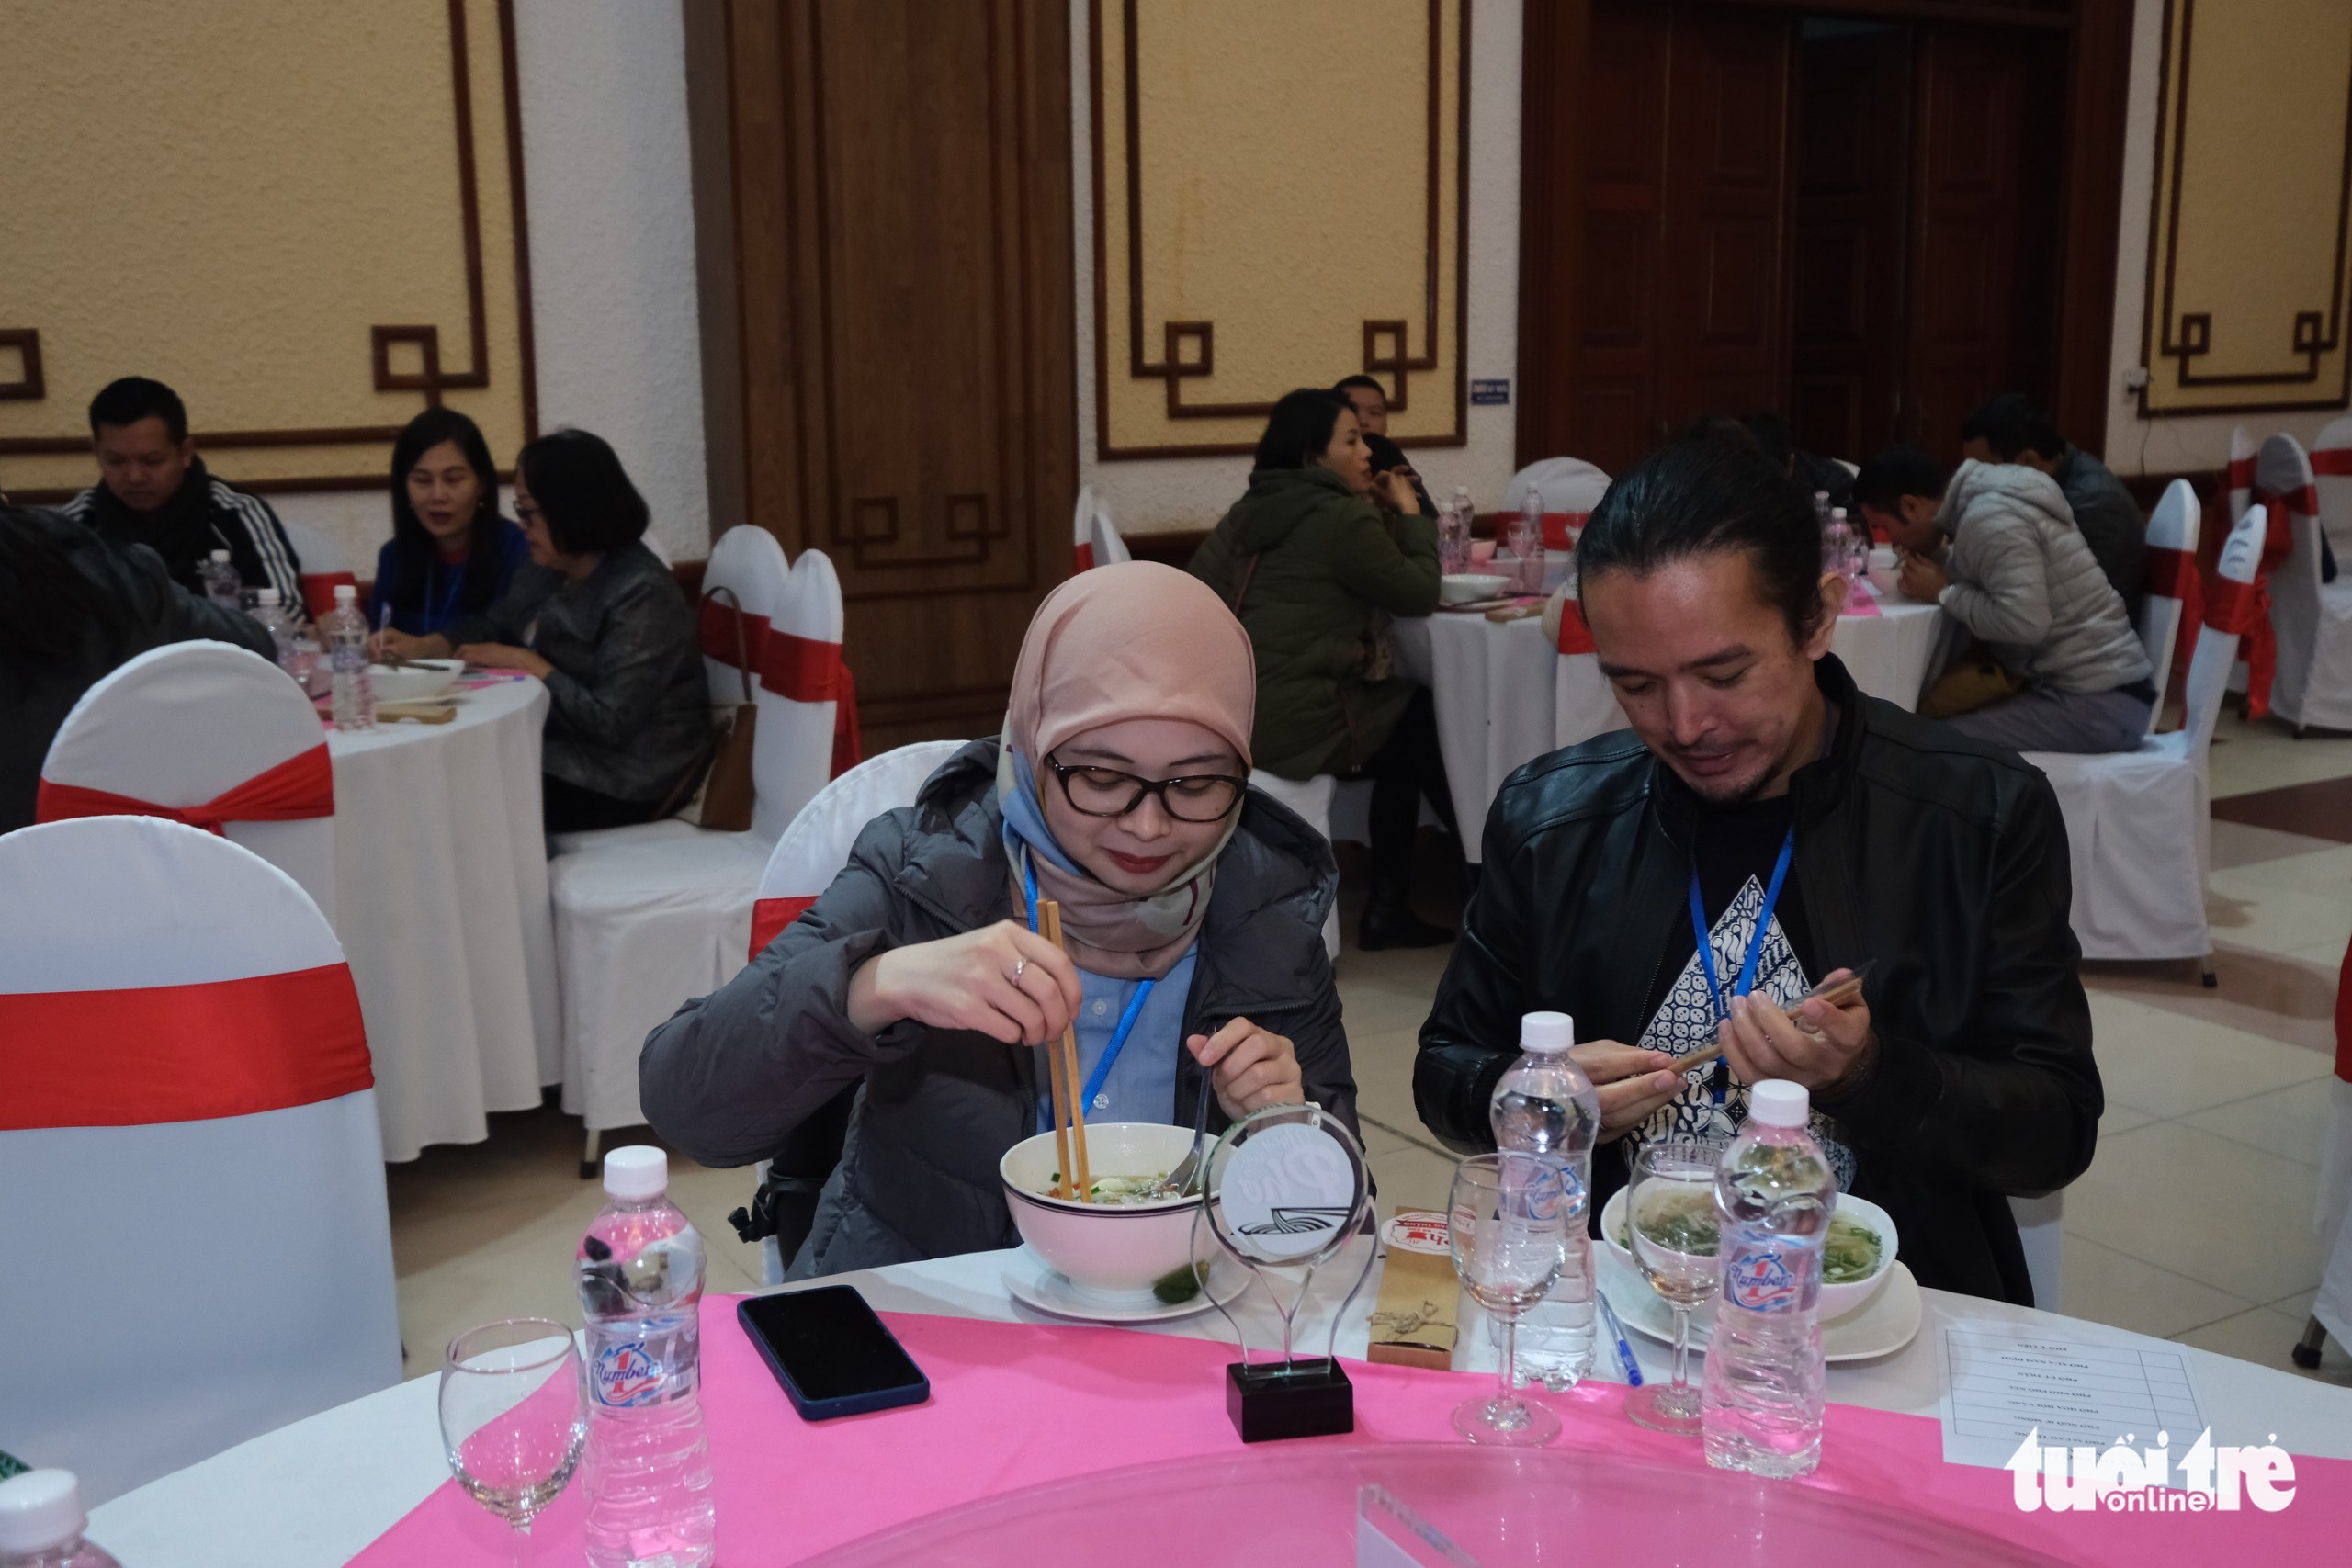 Yully Yudhantari Saputri (L), second secretary of the Embassy of Indonesia in Vietnam, and her husband experience pho at the Day of Pho event organized by Tuoi Tre (Youth) newspaper in Nam Dinh Province, Vietnam, December 10, 2022. Photo: Nam Tran / Tuoi Tre